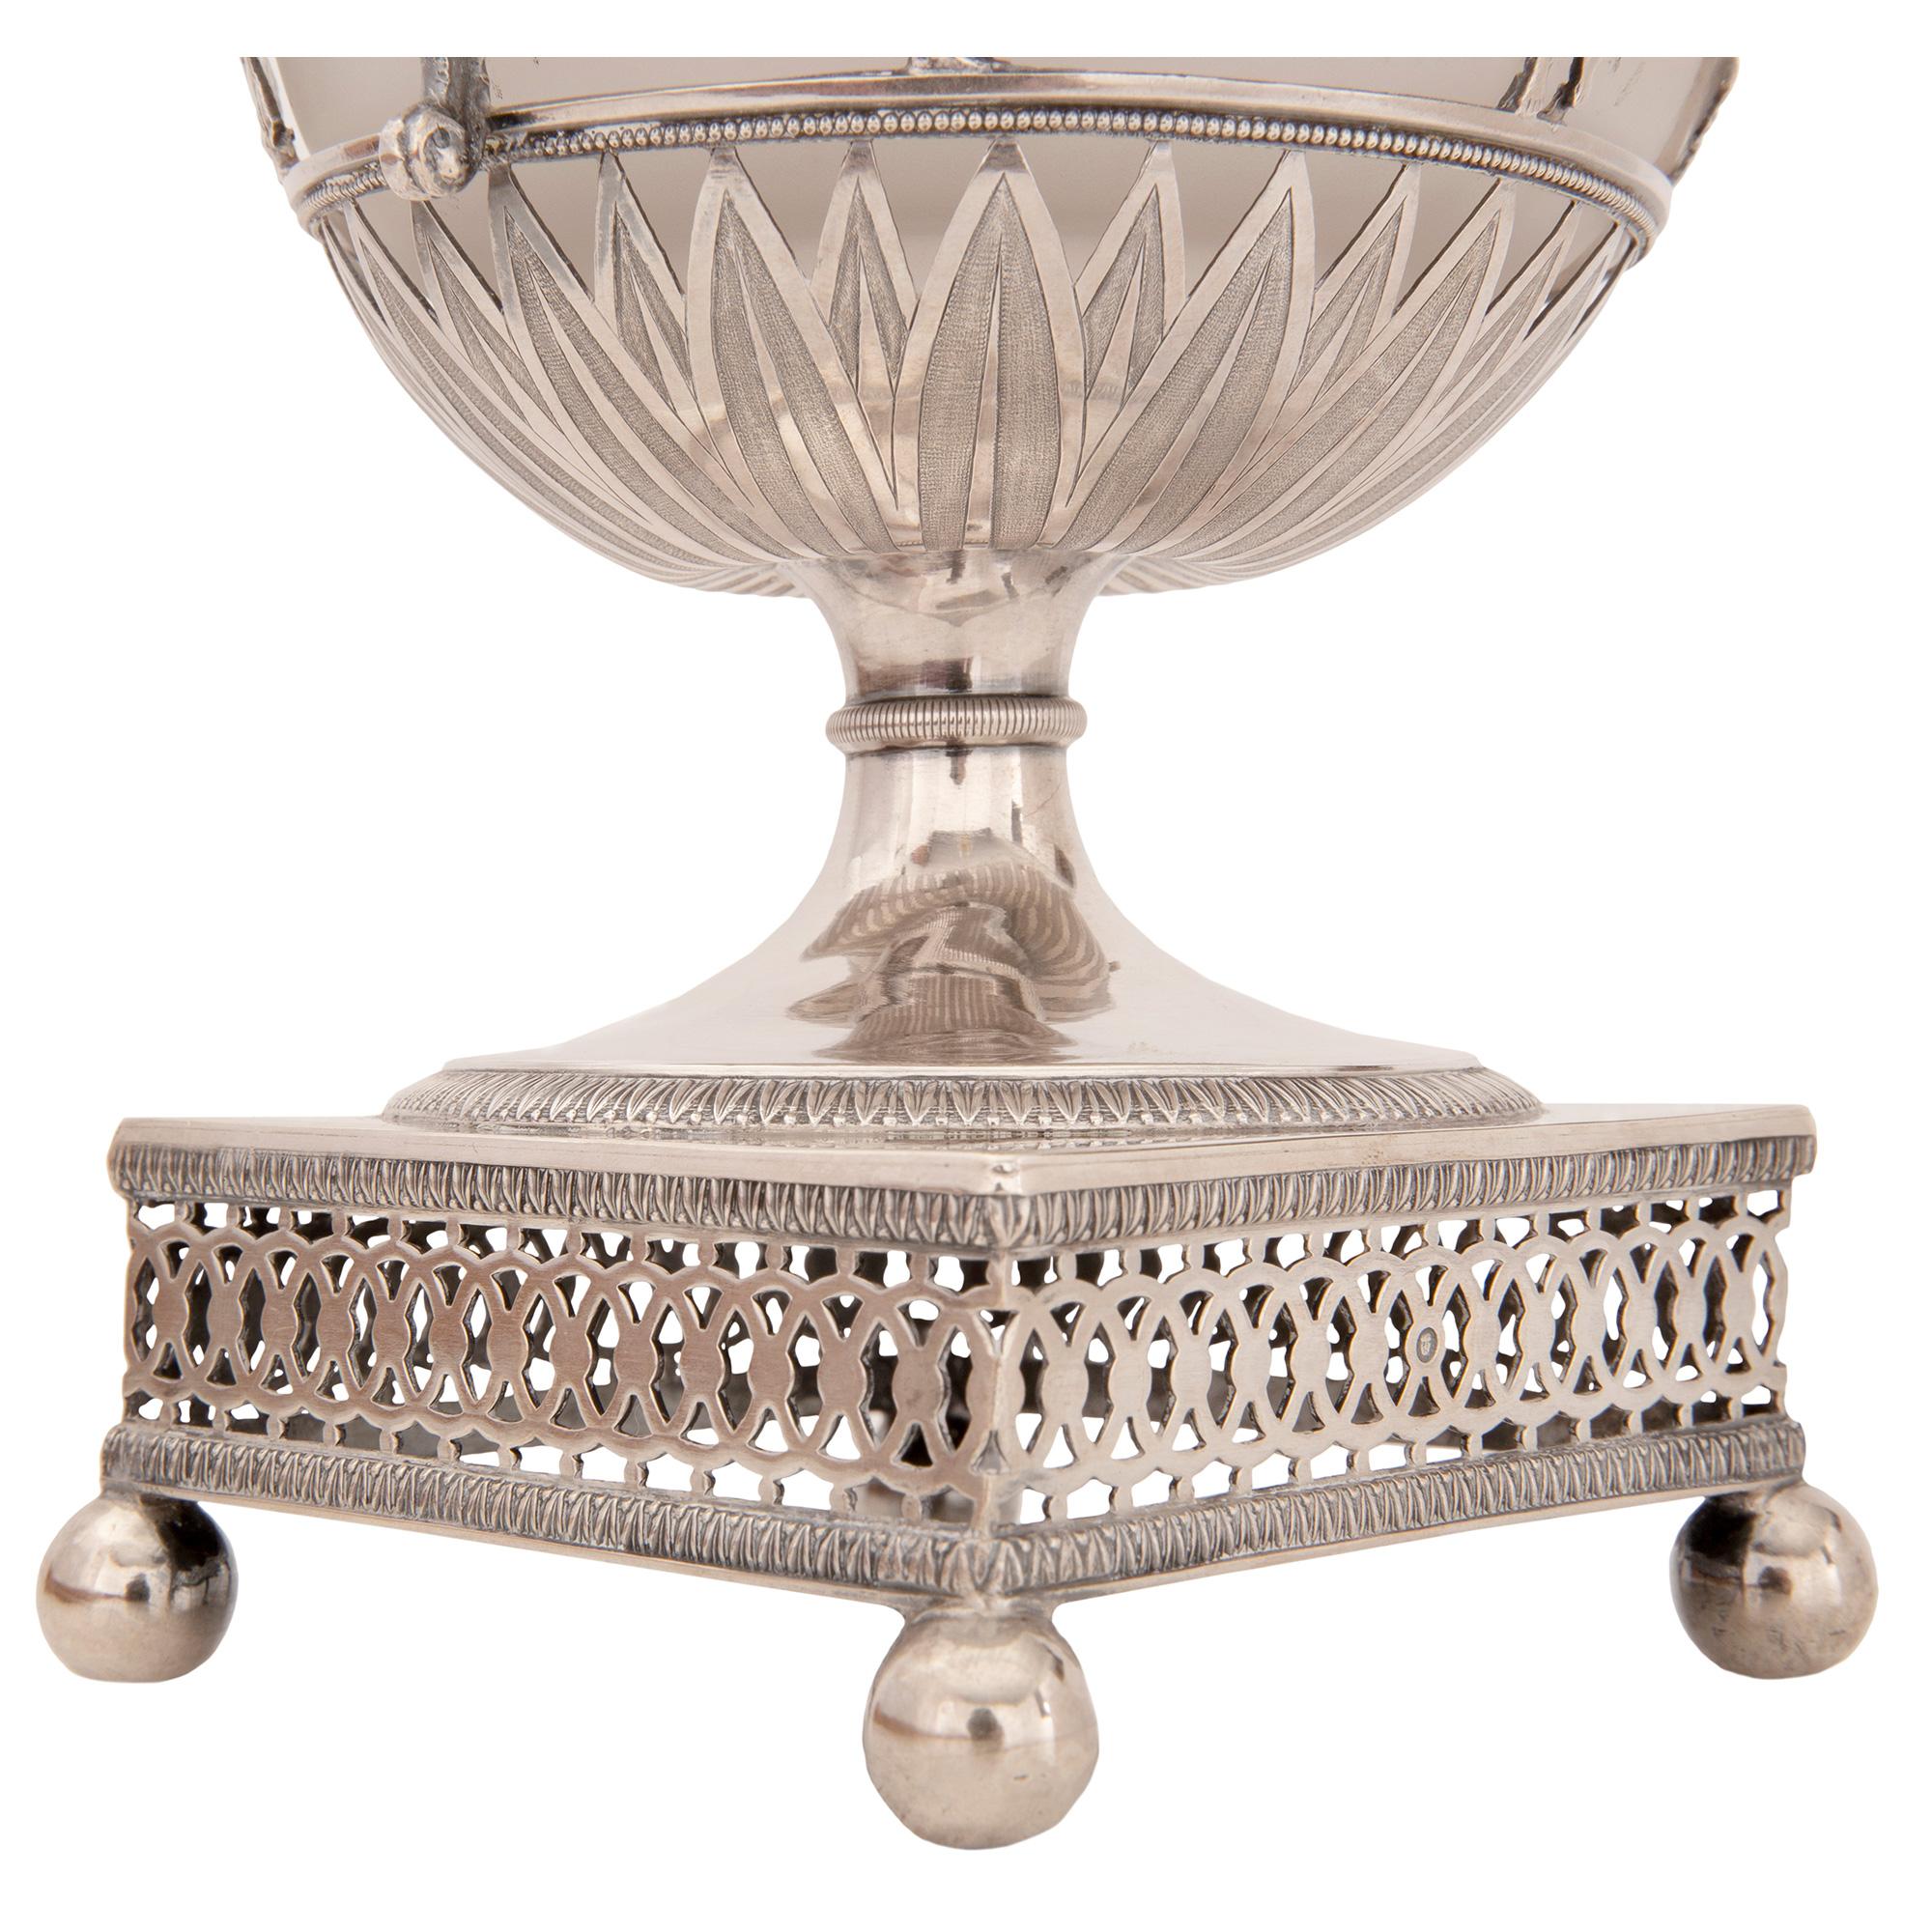 French Early 19th Century 1st Empire Period Signed Sterling Silver Lidded Urn For Sale 4